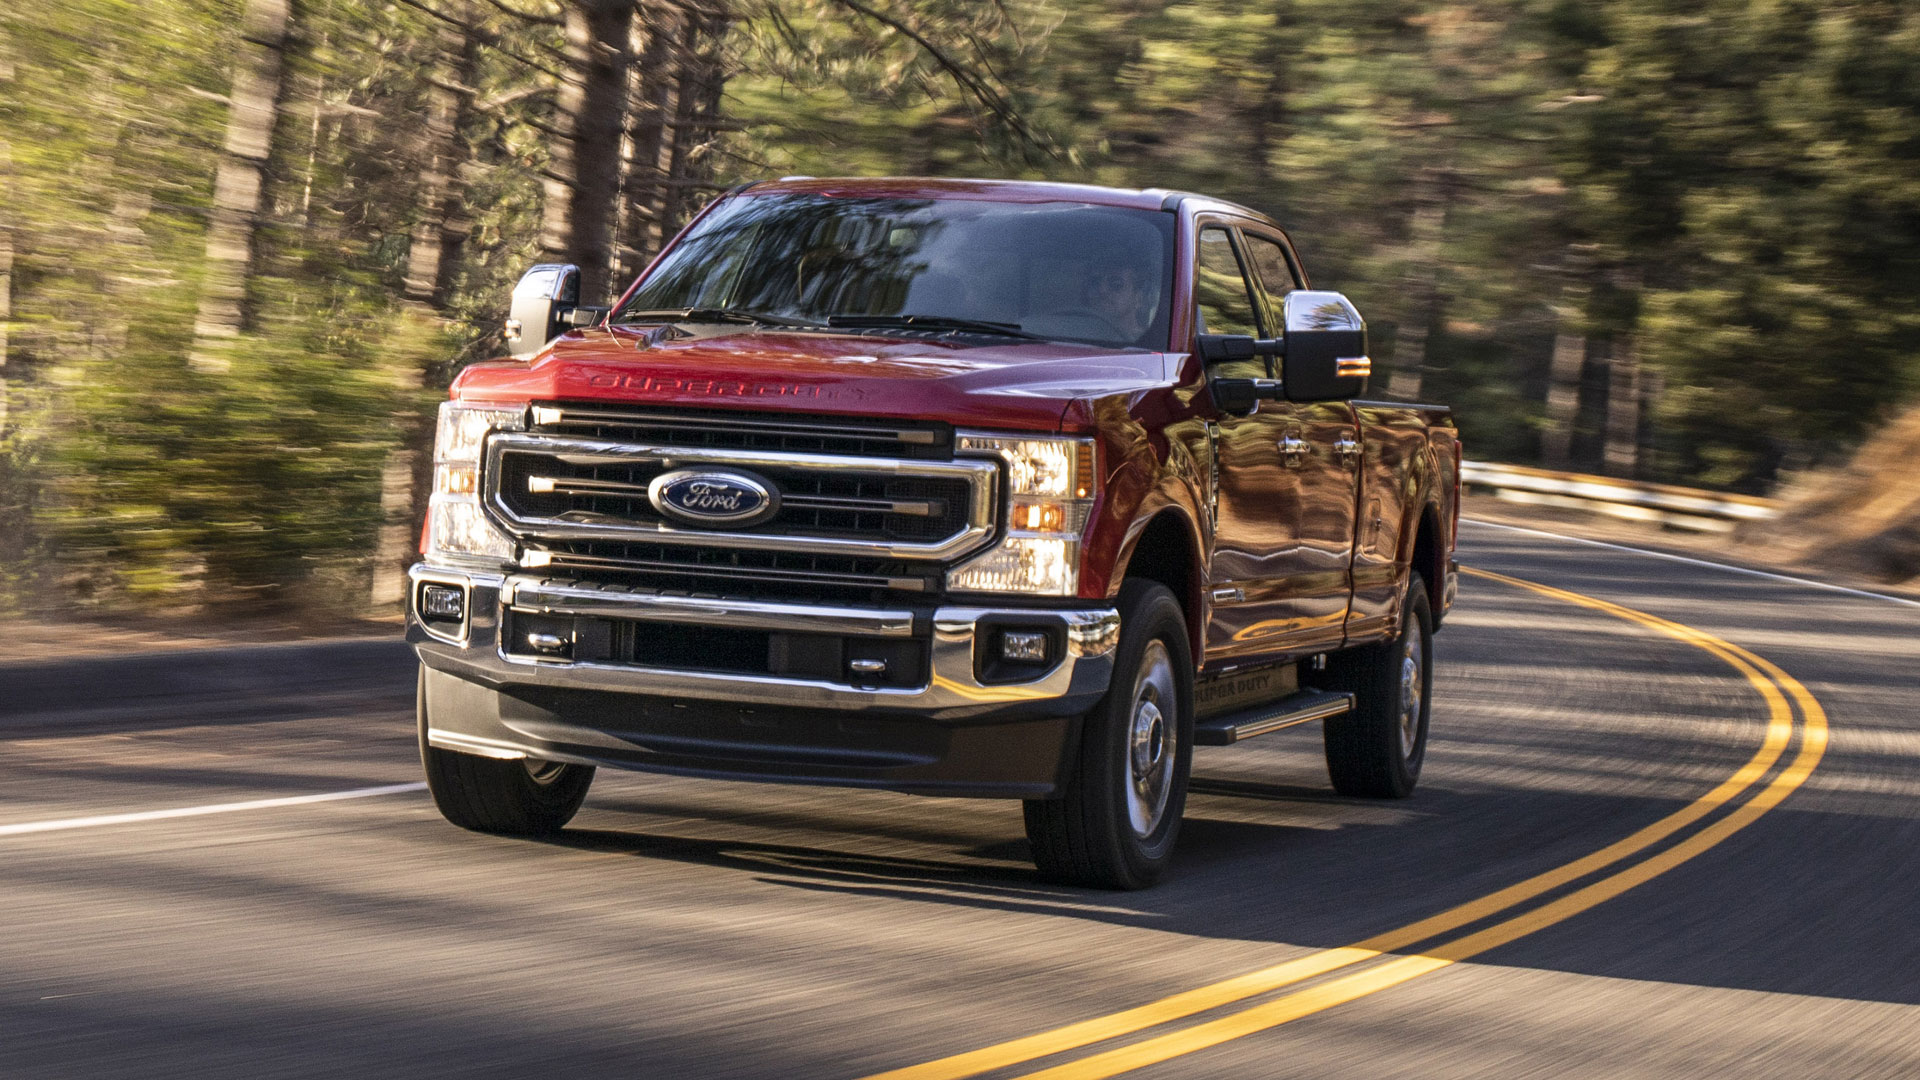 Ford F-250 Super Duty | picture alliance/AP Photo